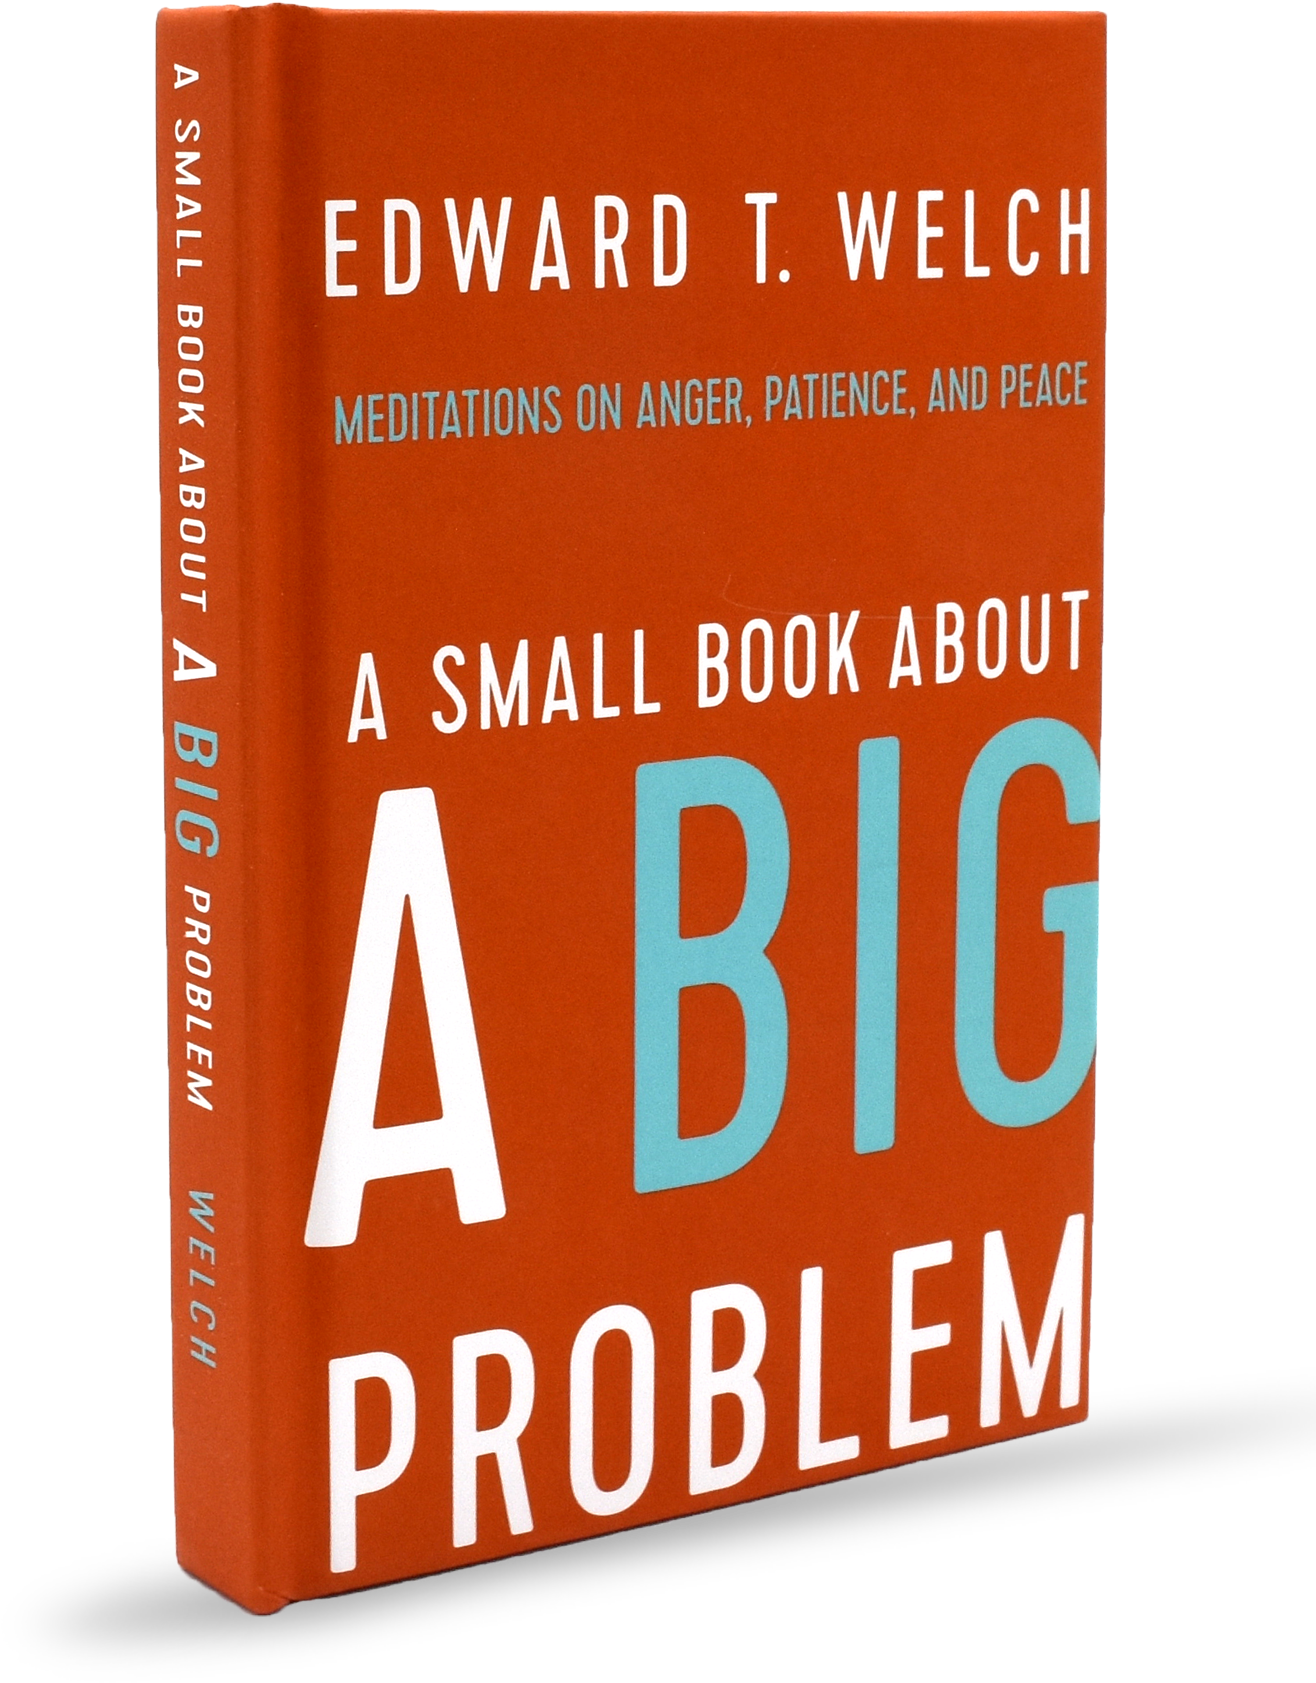 A Small Book About A Big Problem Cover PNG